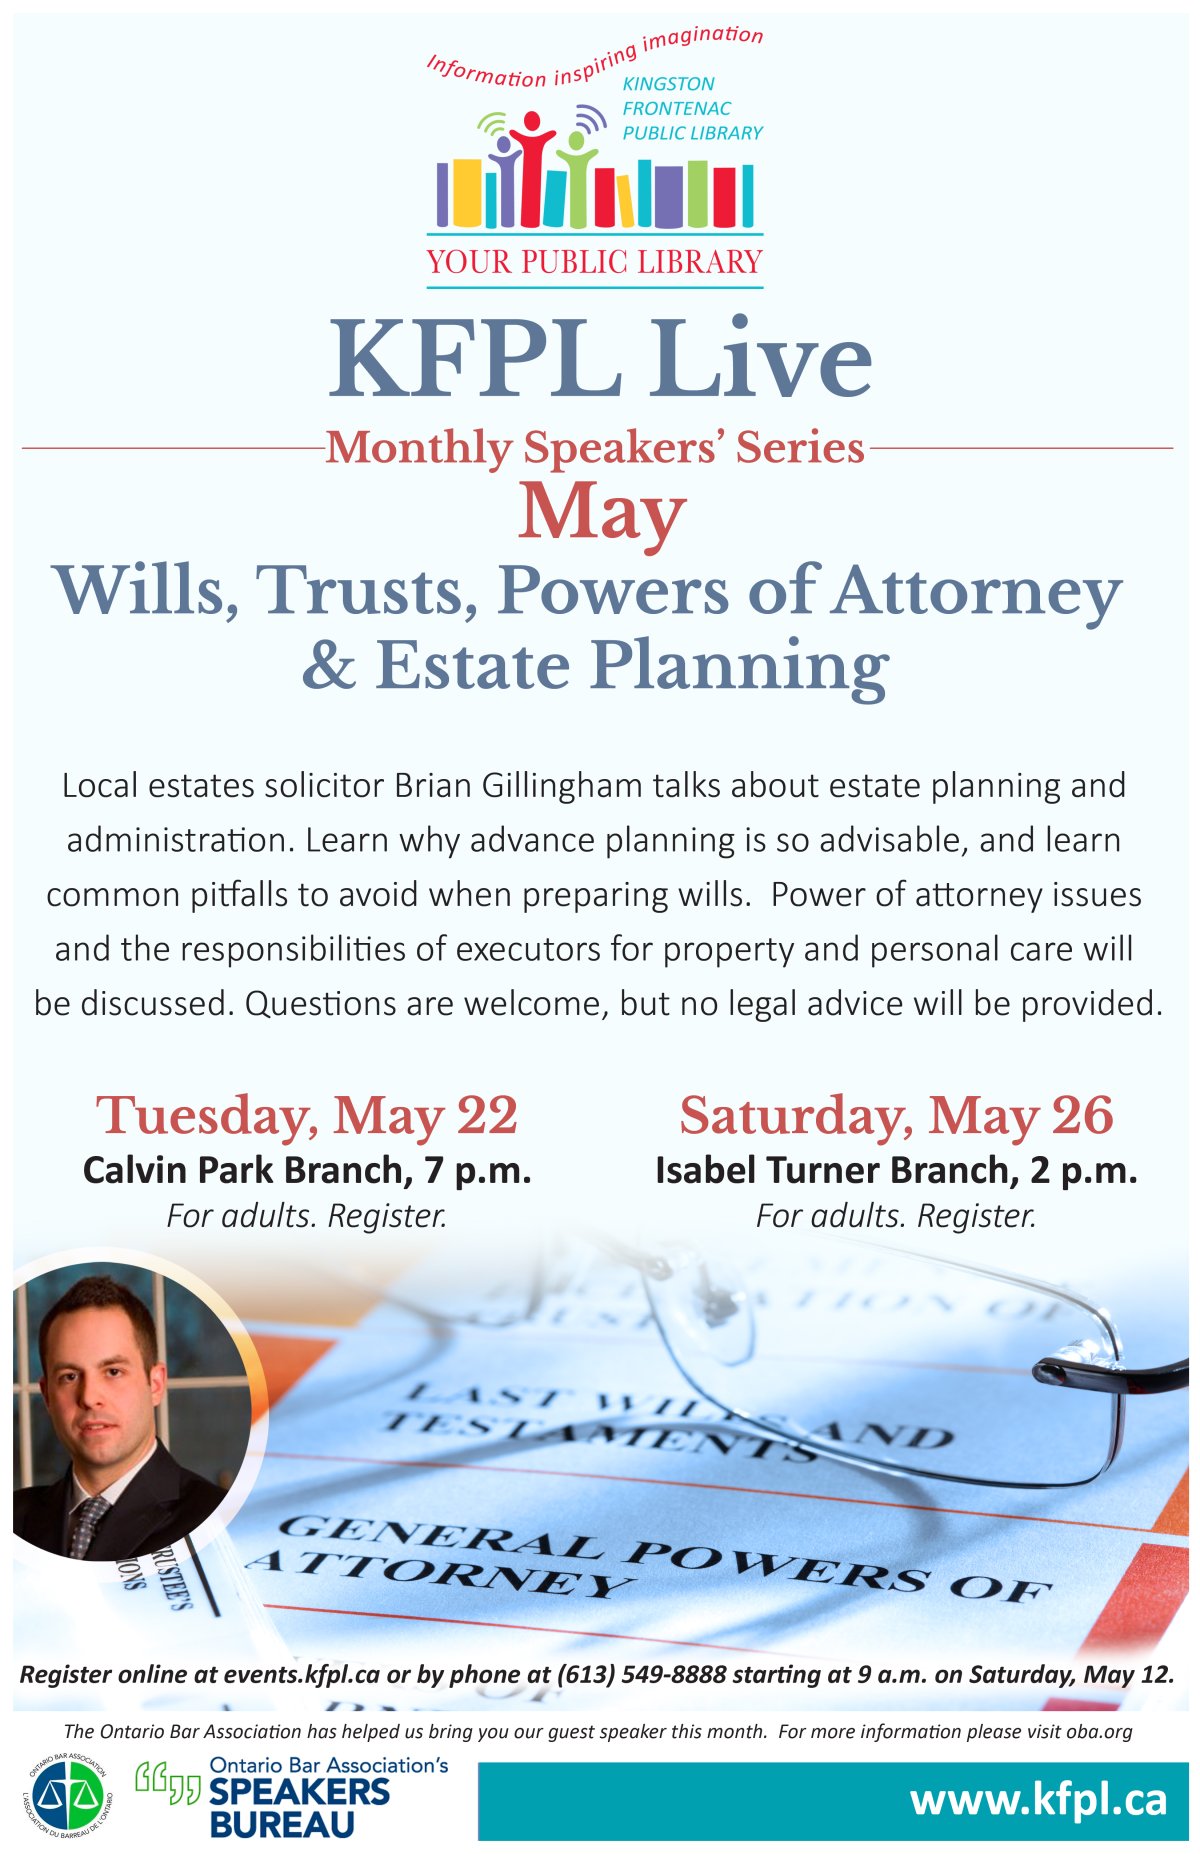 Public Talk on Wills, Trusts, Powers of Attorney & Estate Planning - image